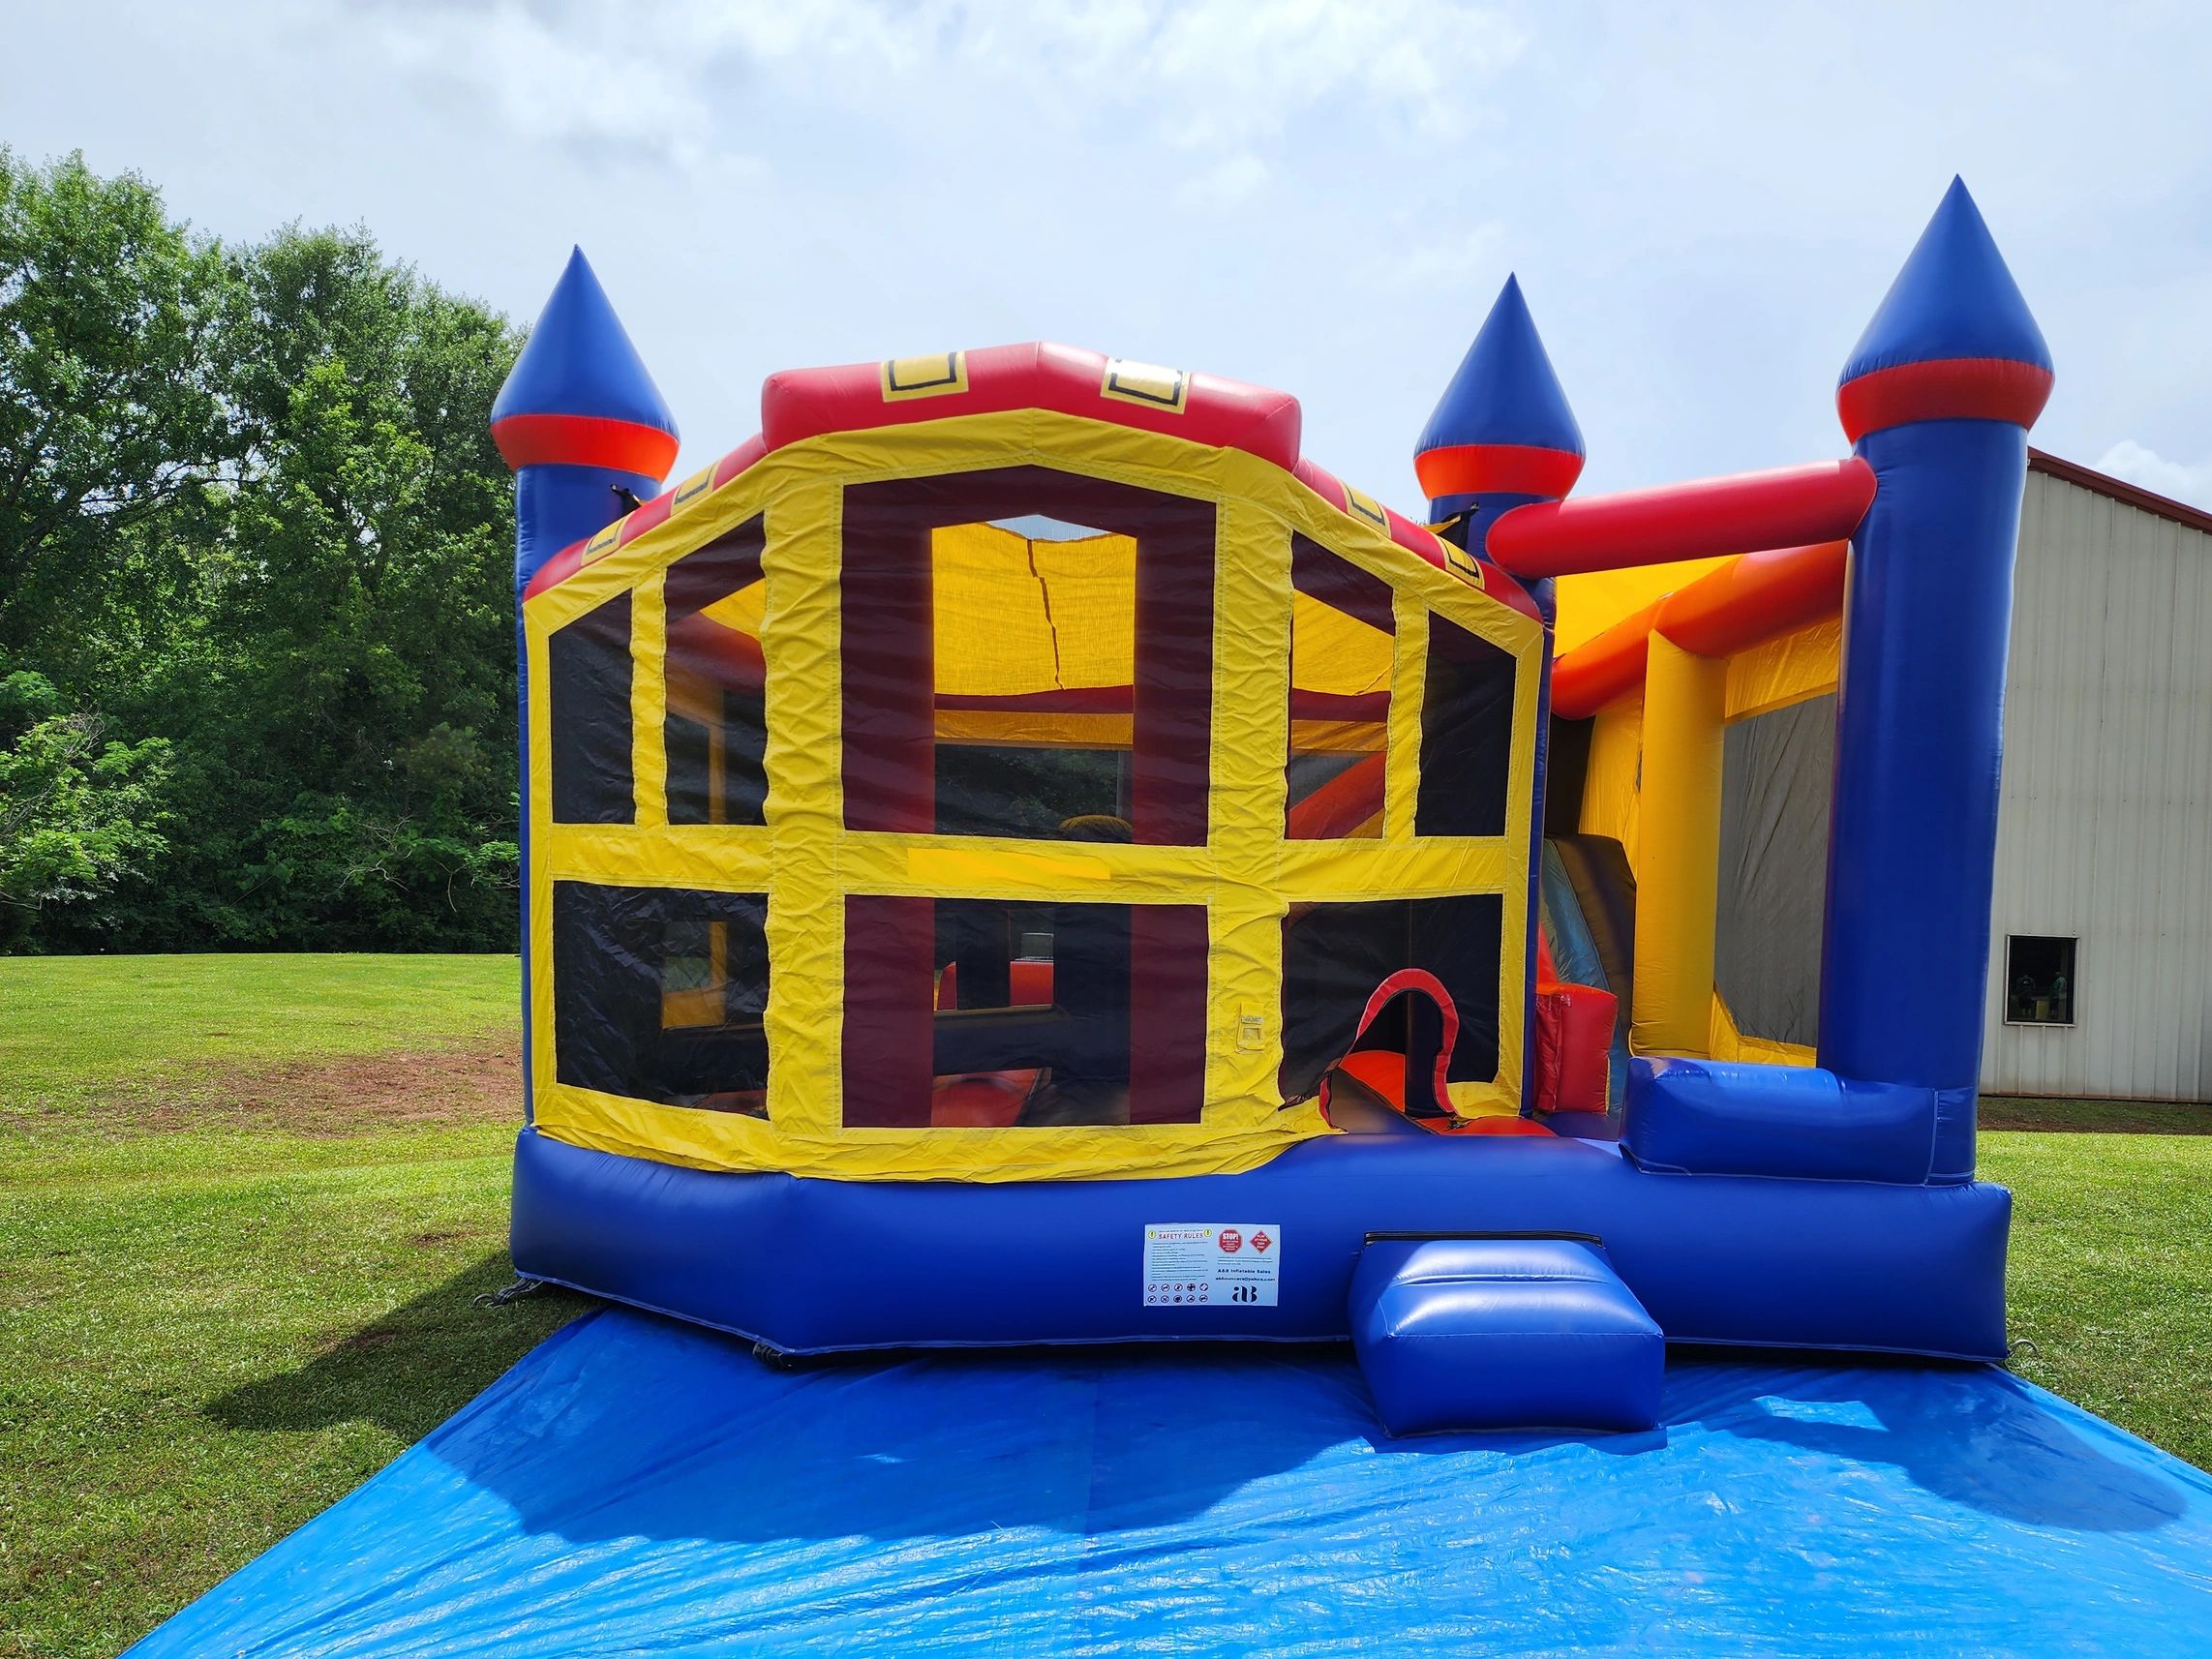 A&B bounce party rentals LLC Port St. Lucie FL - Party Rental and